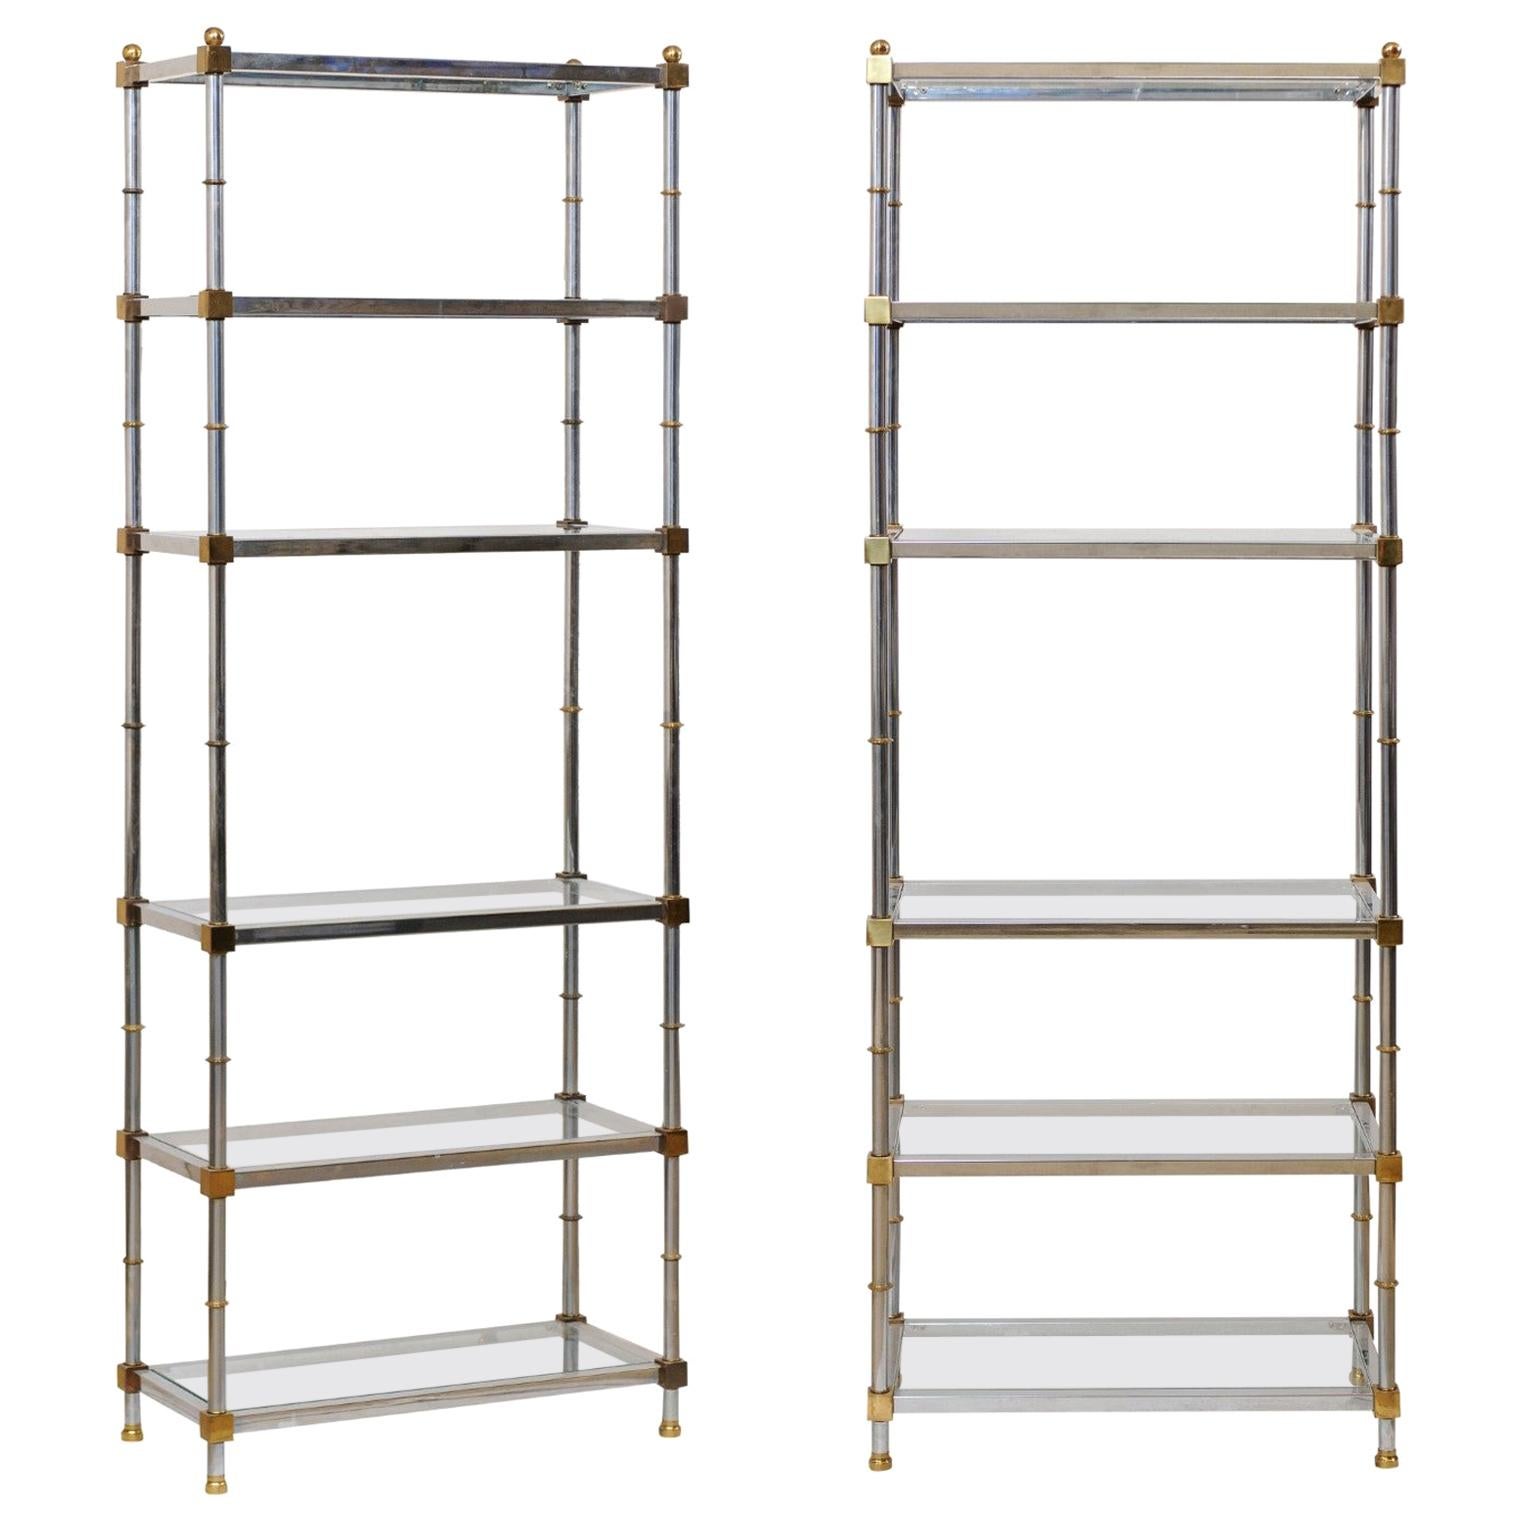 Pair of Midcentury Chrome and Glass Open Display Shelves, Maison Jansen Style